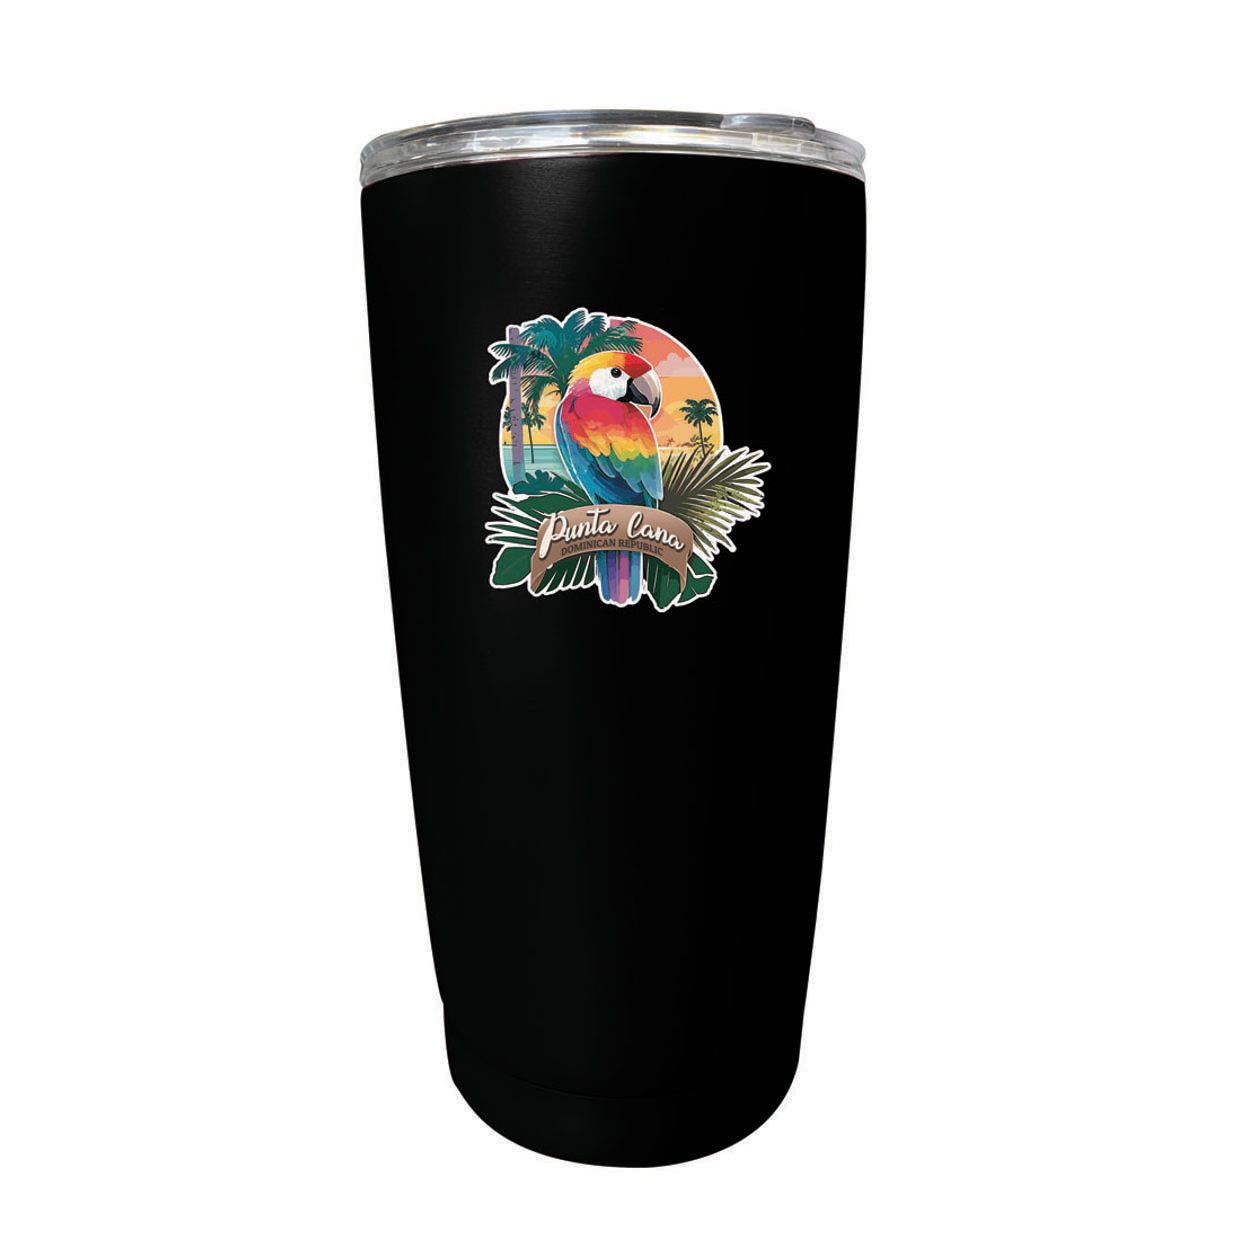 Punta Cana Dominican Republic Souvenir 16 Oz Stainless Steel Insulated Tumbler - Black, PARROT